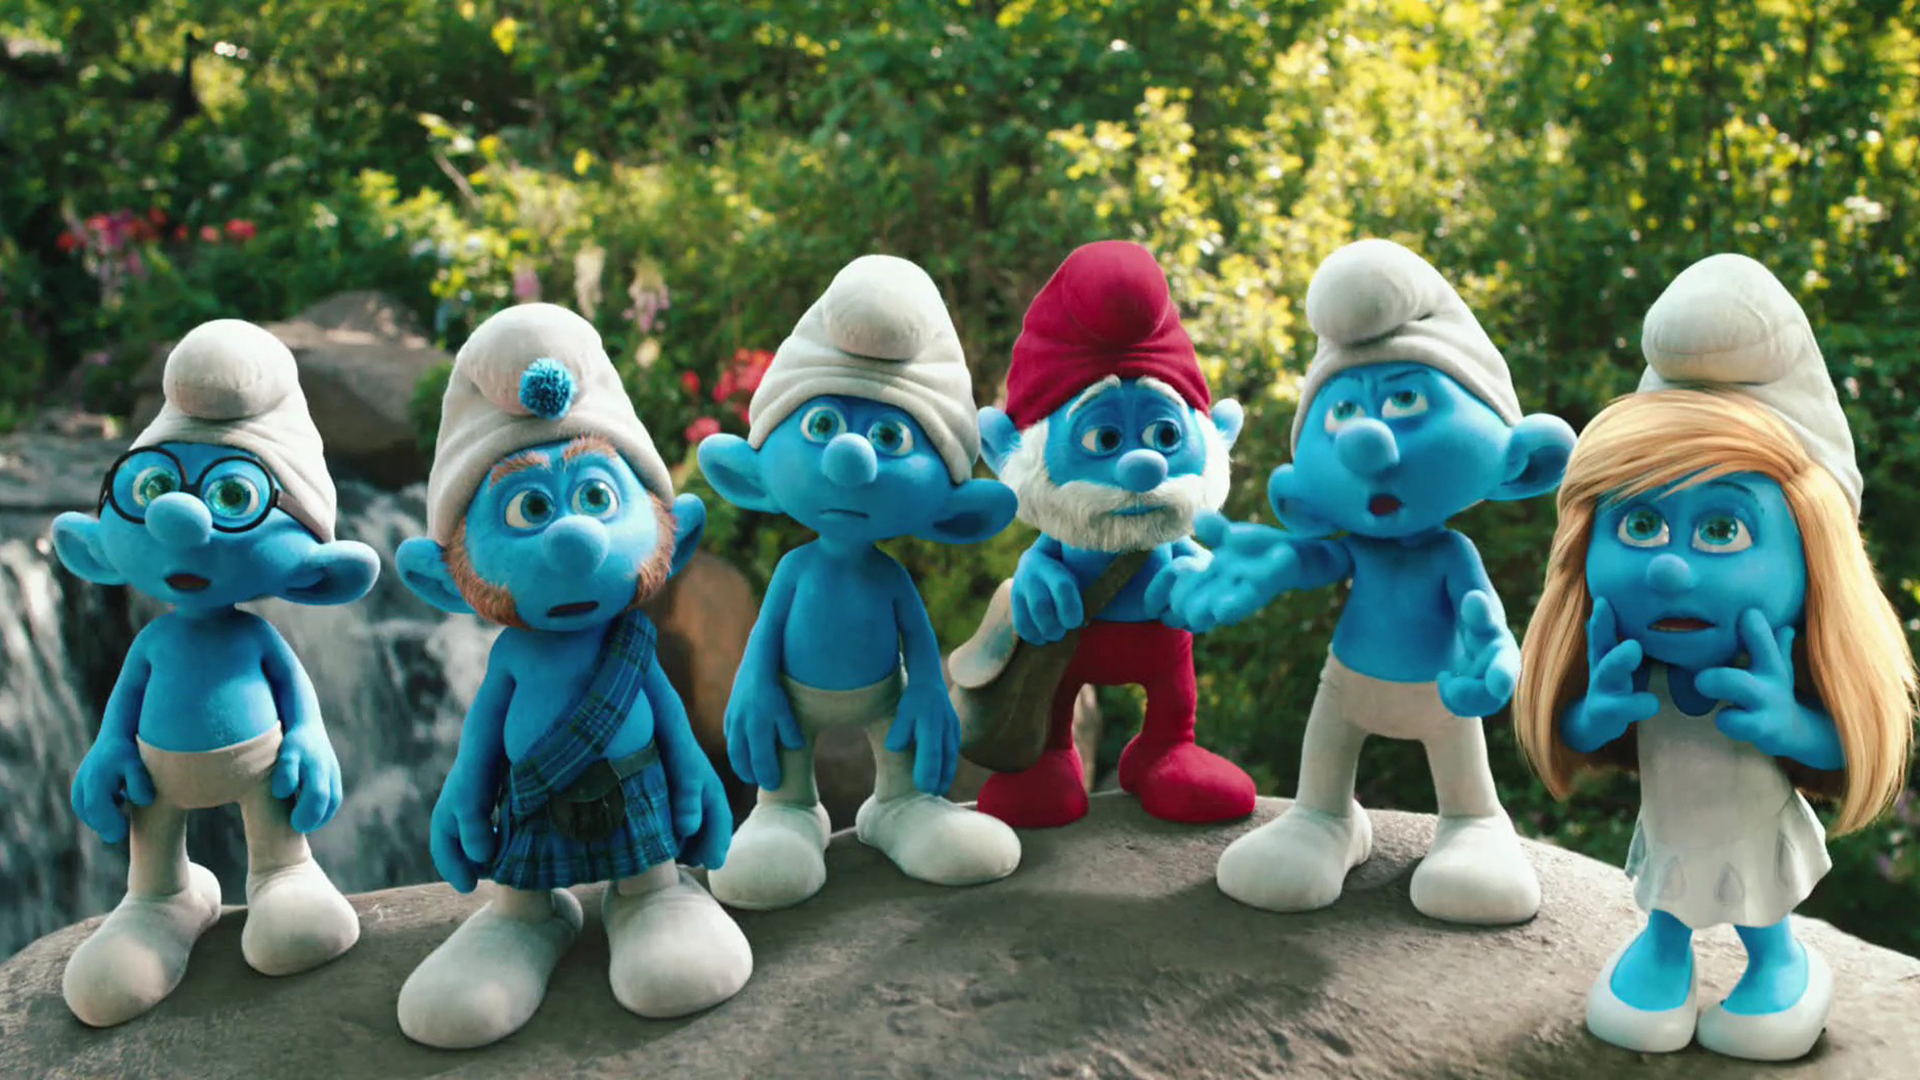 Free download The Smurfs Desktop Wallpaper for HD Widescreen and Mobile [1920x1080] for your Desktop, Mobile & Tablet. Explore Smurf Wallpaper Desktop. Smurfs Wallpaper, Vintage Smurf Wallpaper